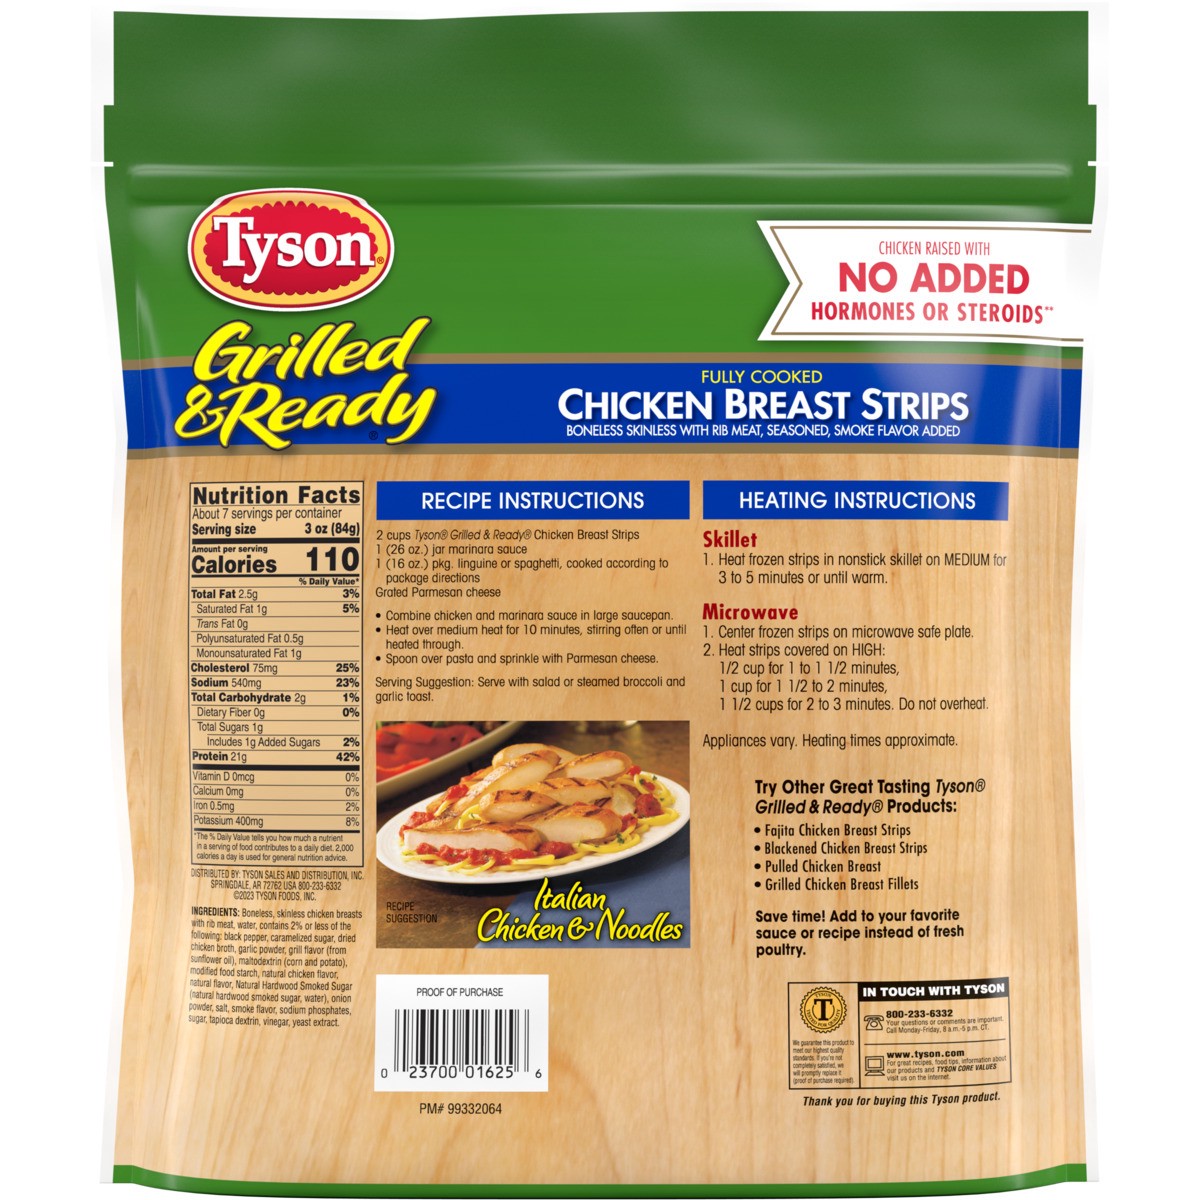 slide 5 of 10, TYSON GRILLED AND READY Tyson Grilled & Ready Fully Cooked Grilled Chicken Breast Strips, 22 oz. (Frozen), 623.69 g